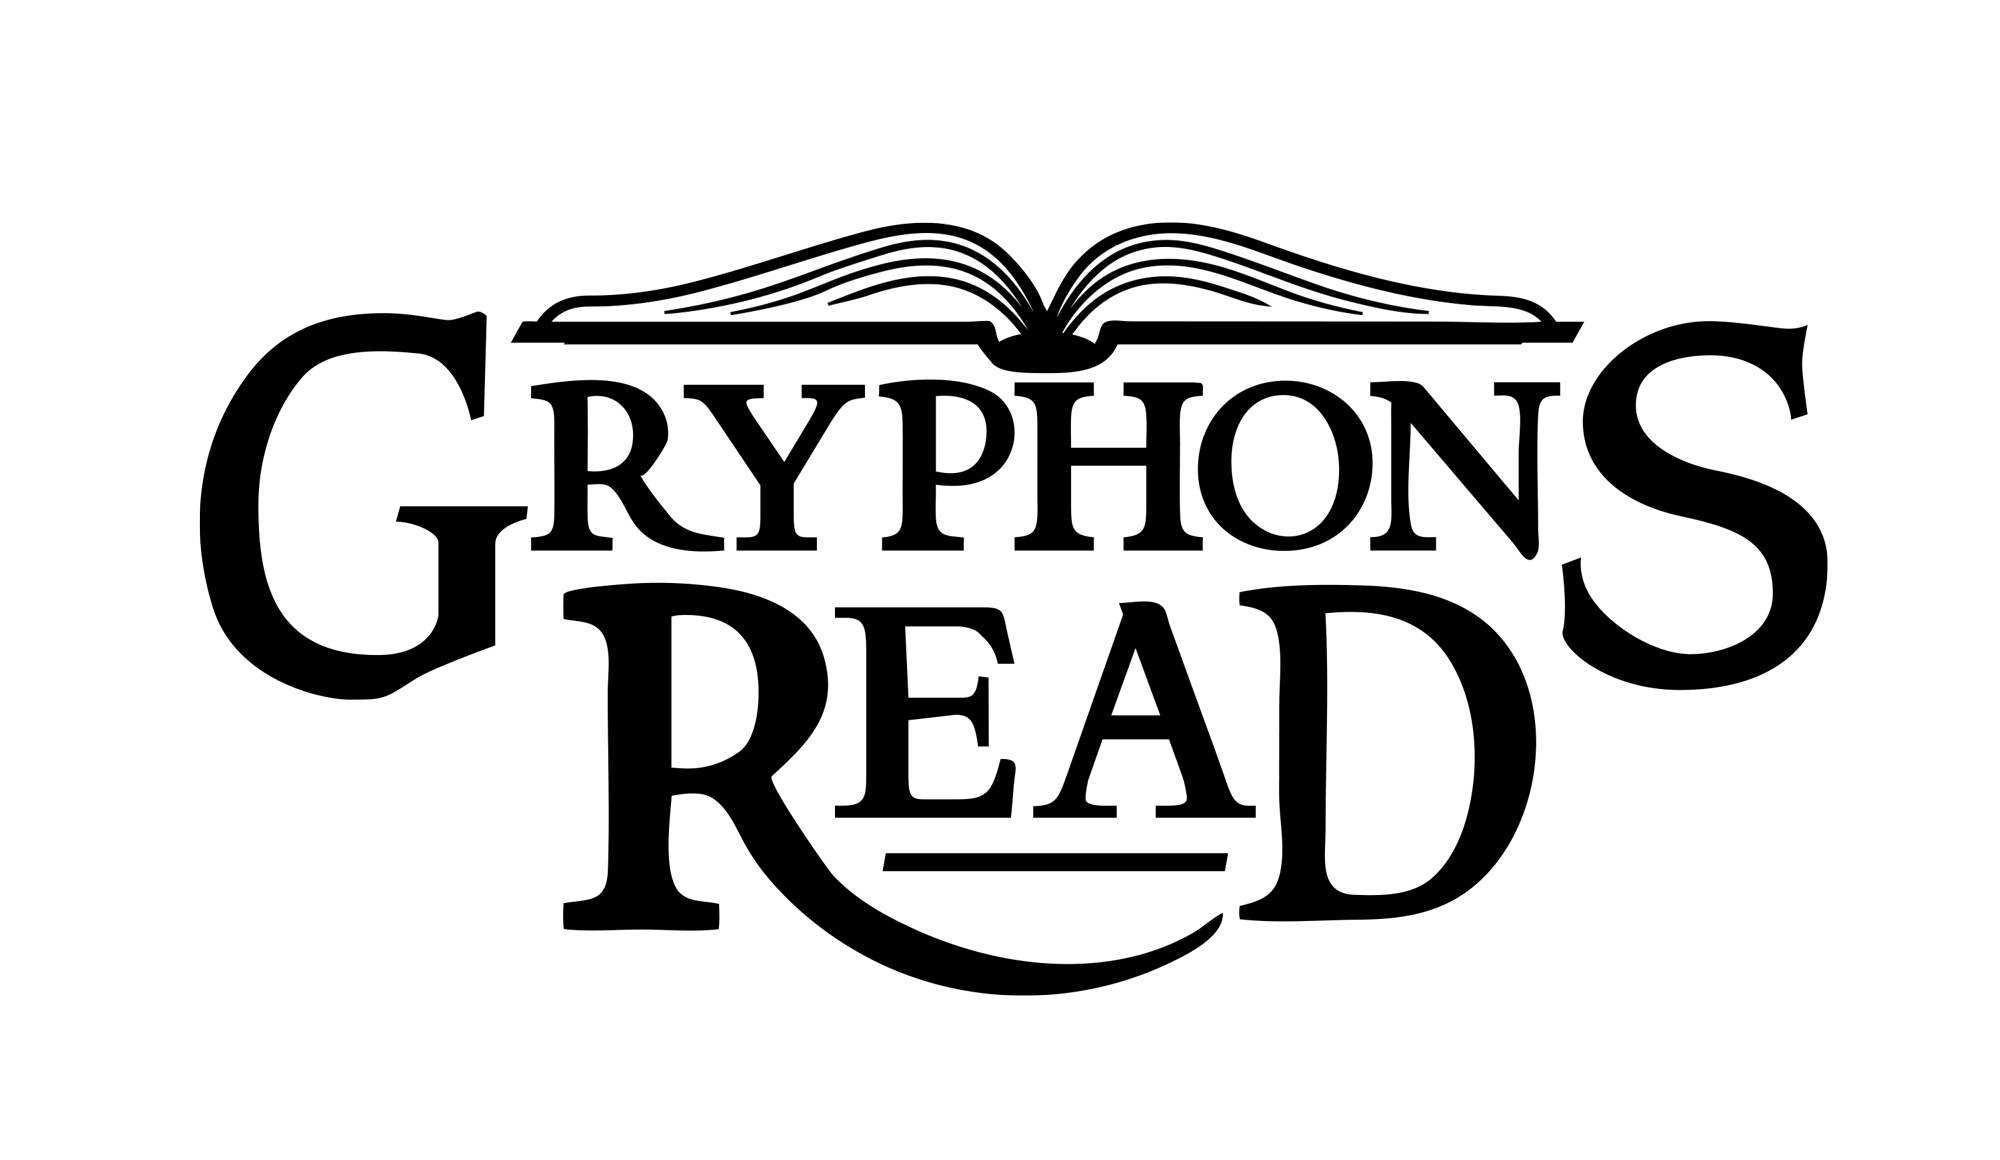 Need a Book This Summer? Check out Gryphons Read!